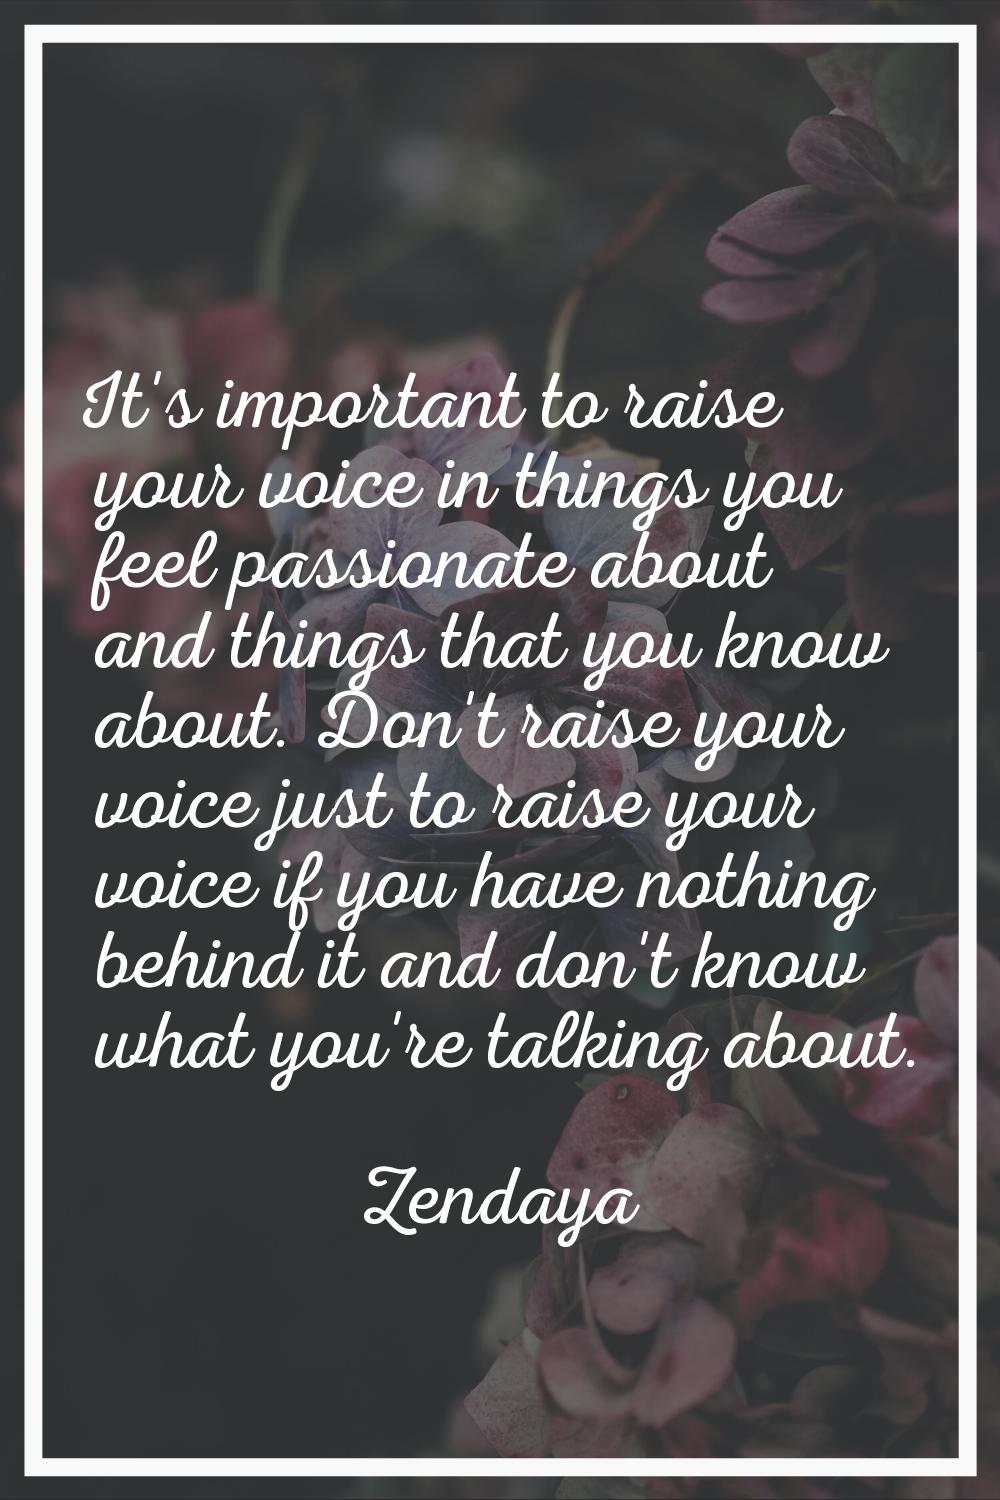 It's important to raise your voice in things you feel passionate about and things that you know abo